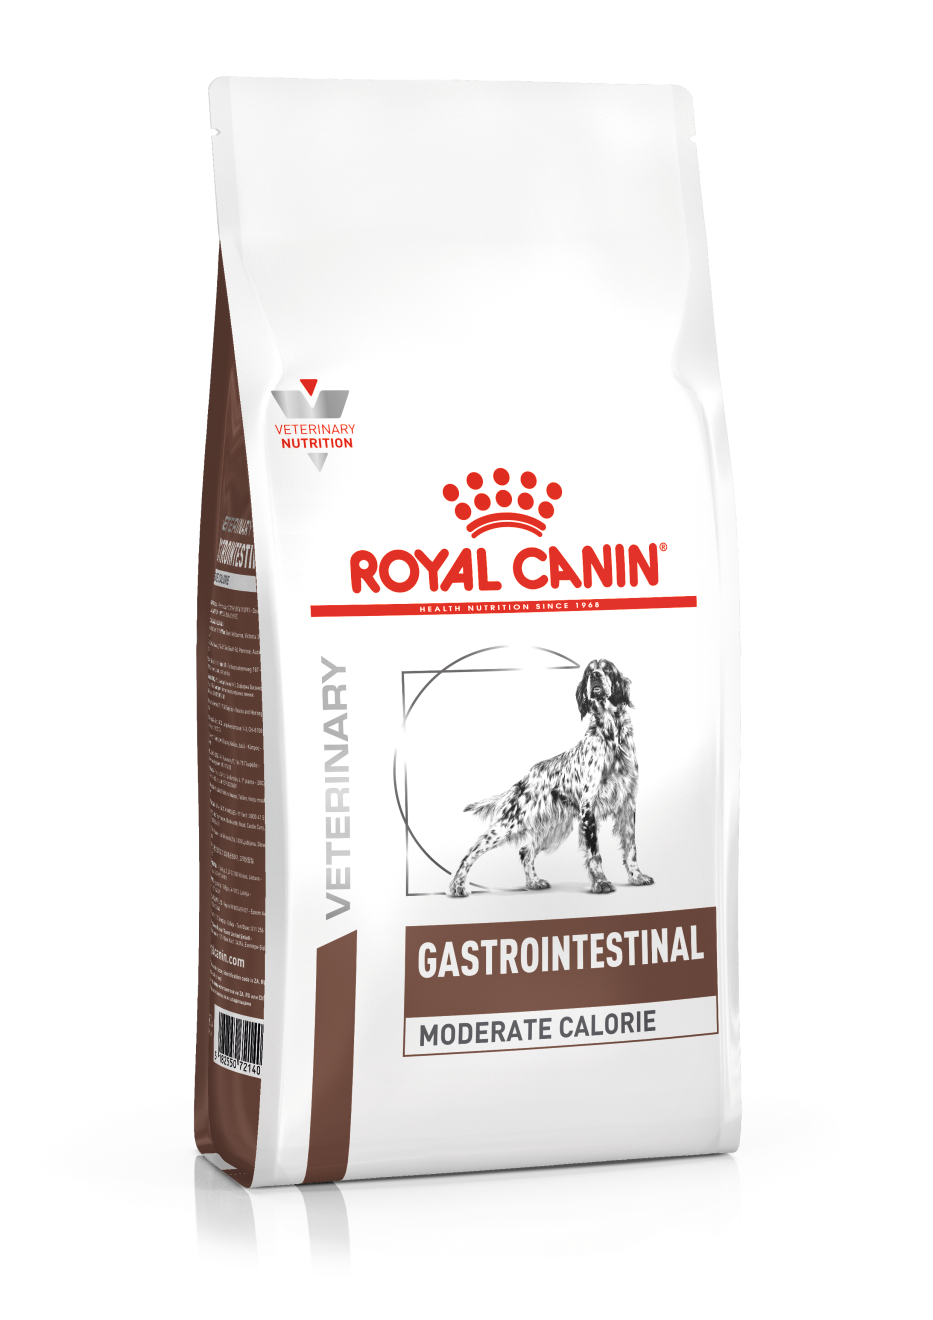 Royal Canin Gastro Intestinal Moderate Calorie 2 x 7.5 kg